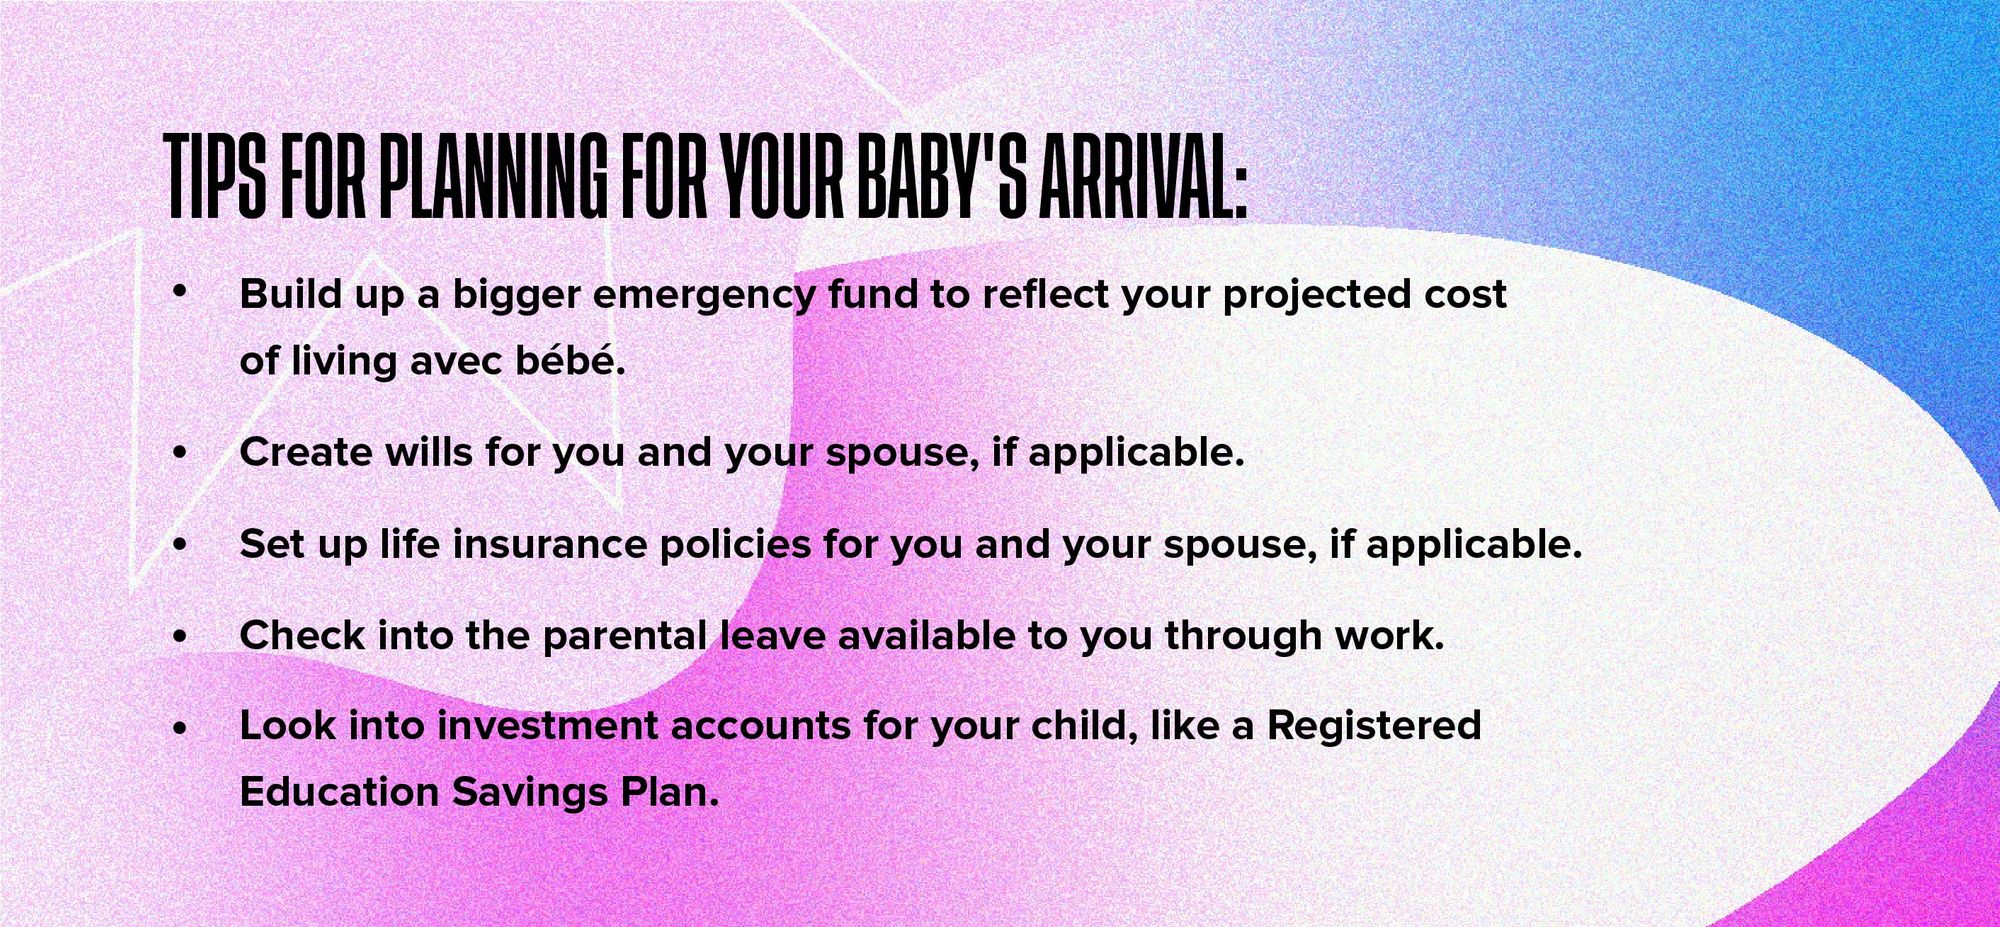 Tips for planning for your baby's arrival: